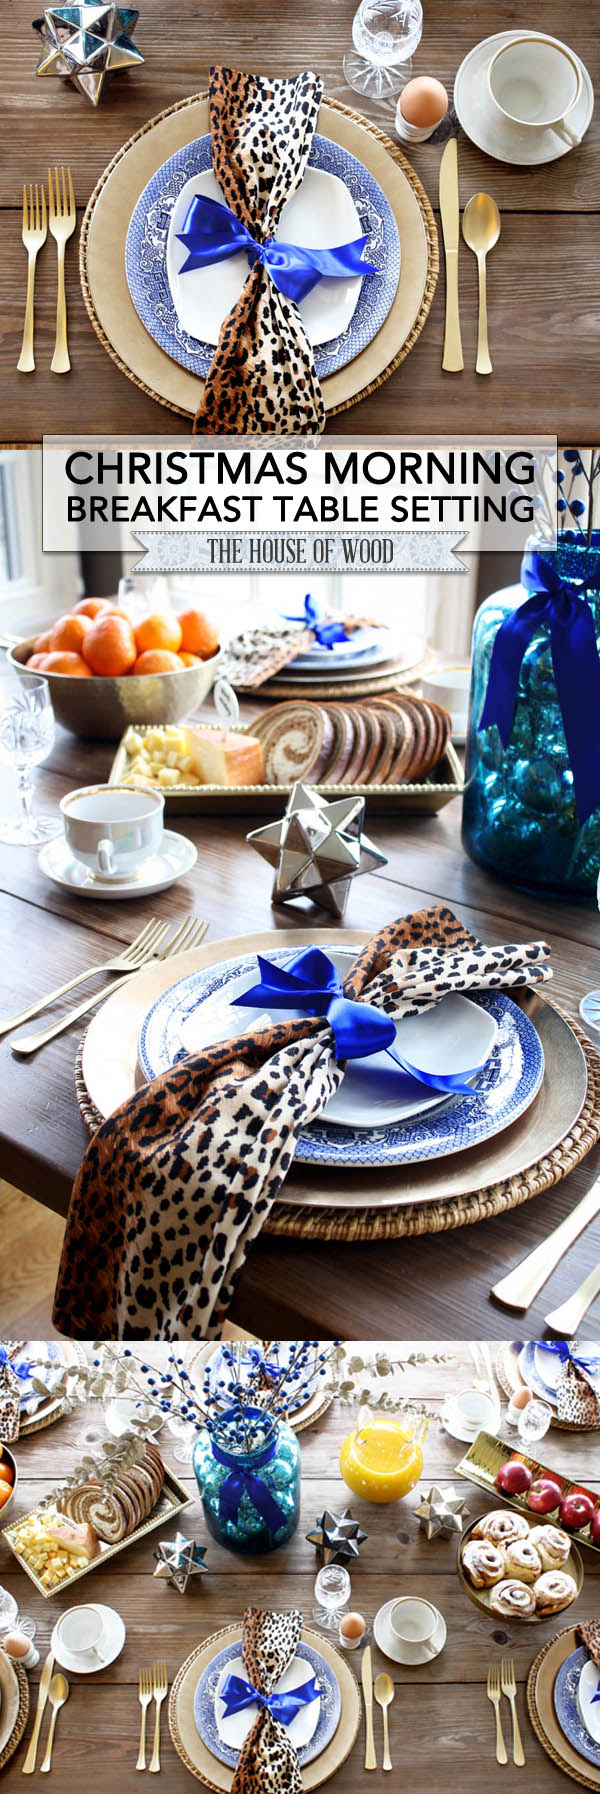 Bring color and glam to your holiday table with this stunning Christmas tablescape decorated with leopard print, royal blue, and gold! | www.jenwoodhouse.com/blog